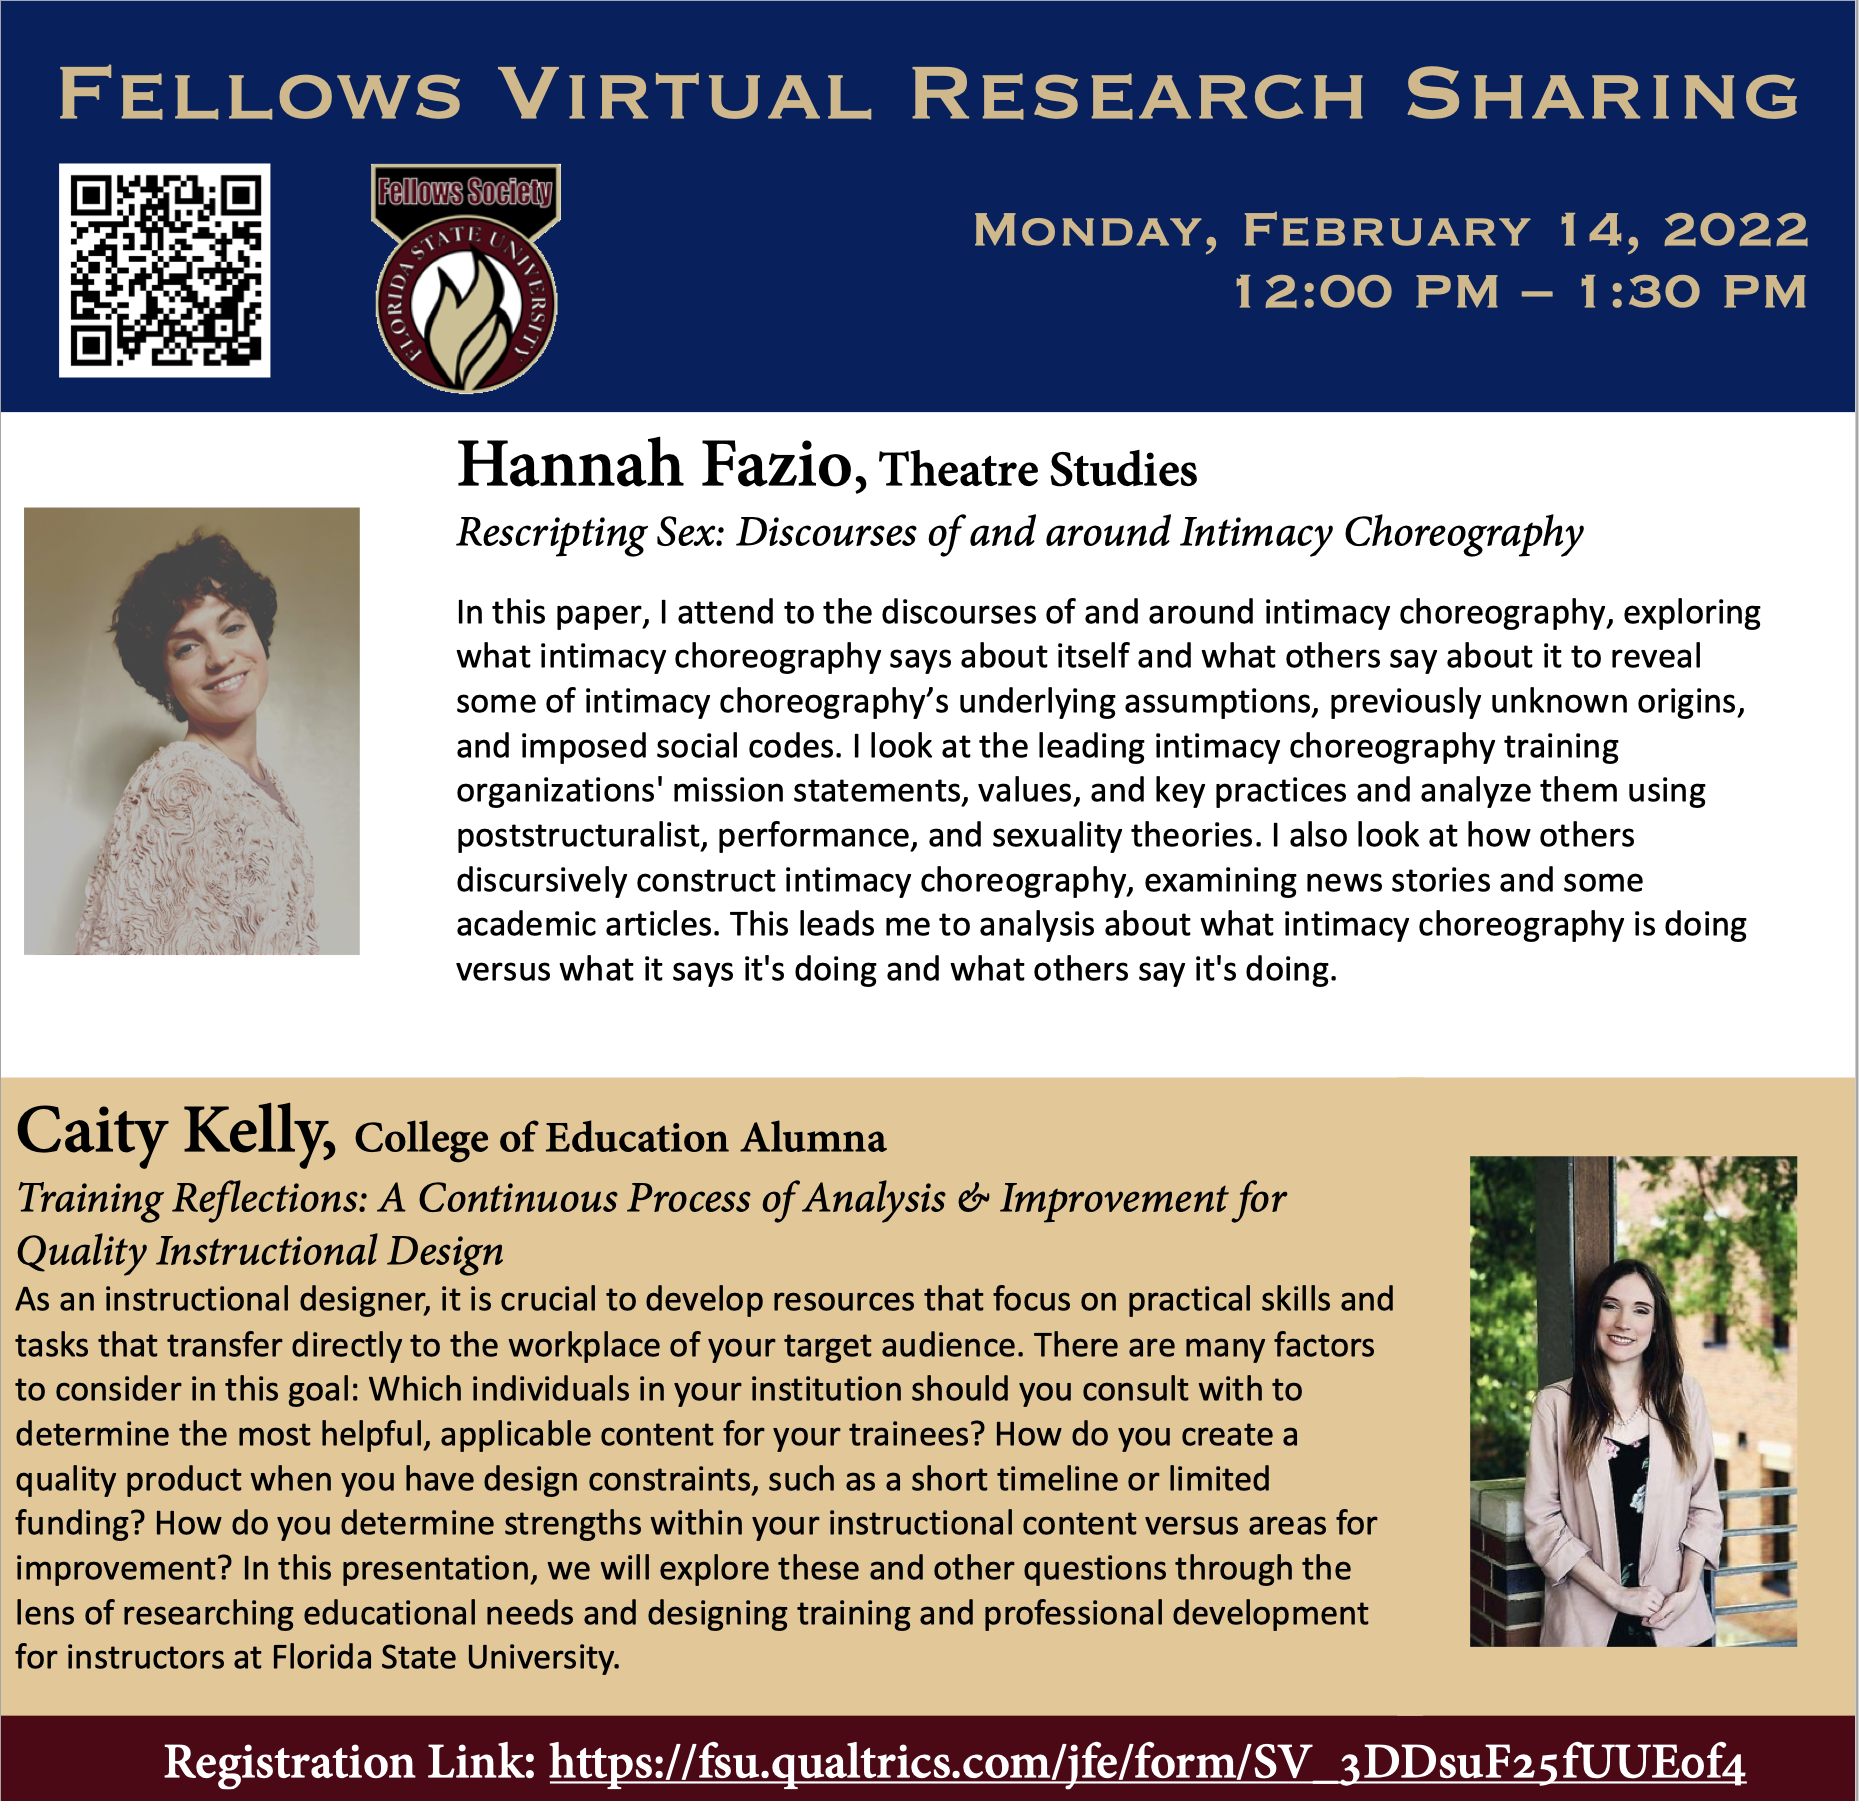 Spring 2022 Virtual Fellows Research Sharing Noon to 1:30 PM Monday Feb 14, 2022 https://fellowssociety.fsu.edu/ Hannah Fazio Theatre Studies Rescripting Sex: Discourses of and around Intimacy Choreography In this paper, I attend to the discourses of and around intimacy choreography, exploring what intimacy choreography says about itself and what others say about it to reveal some of intimacy choreography’s underlying assumptions, previously unknown origins, and imposed social codes. I look at the leading intimacy choreography training organizations' mission statements, values, and key practices and analyze them using poststructuralist, performance, and sexuality theories. I also look at how others discursively construct intimacy choreography, examining news stories and some academic articles. This leads me to analysis about what intimacy choreography is doing versus what it says it's doing and what others say it's doing.  Caity Kelly College of Education Alumna Training Reflections: A Continuous Process of Analysis & Improvement for Quality Instructional Design As an instructional designer, it is crucial to develop resources that focus on practical skills and tasks that transfer directly to the workplace of your target audience. There are many factors to consider in this goal: Which individuals in your institution should you consult with to determine the most helpful, applicable content for your trainees? How do you create a quality product when you have design constraints, such as a short timeline or limited funding? How do you determine strengths within your instructional content versus areas for improvement? In this presentation, we will explore these and other questions through the lens of researching educational needs and designing training and professional development for instructors at Florida State University. Registration Link: https://fsu.qualtrics.com/jfe/form/SV_3DDsuF25fUUE0f4